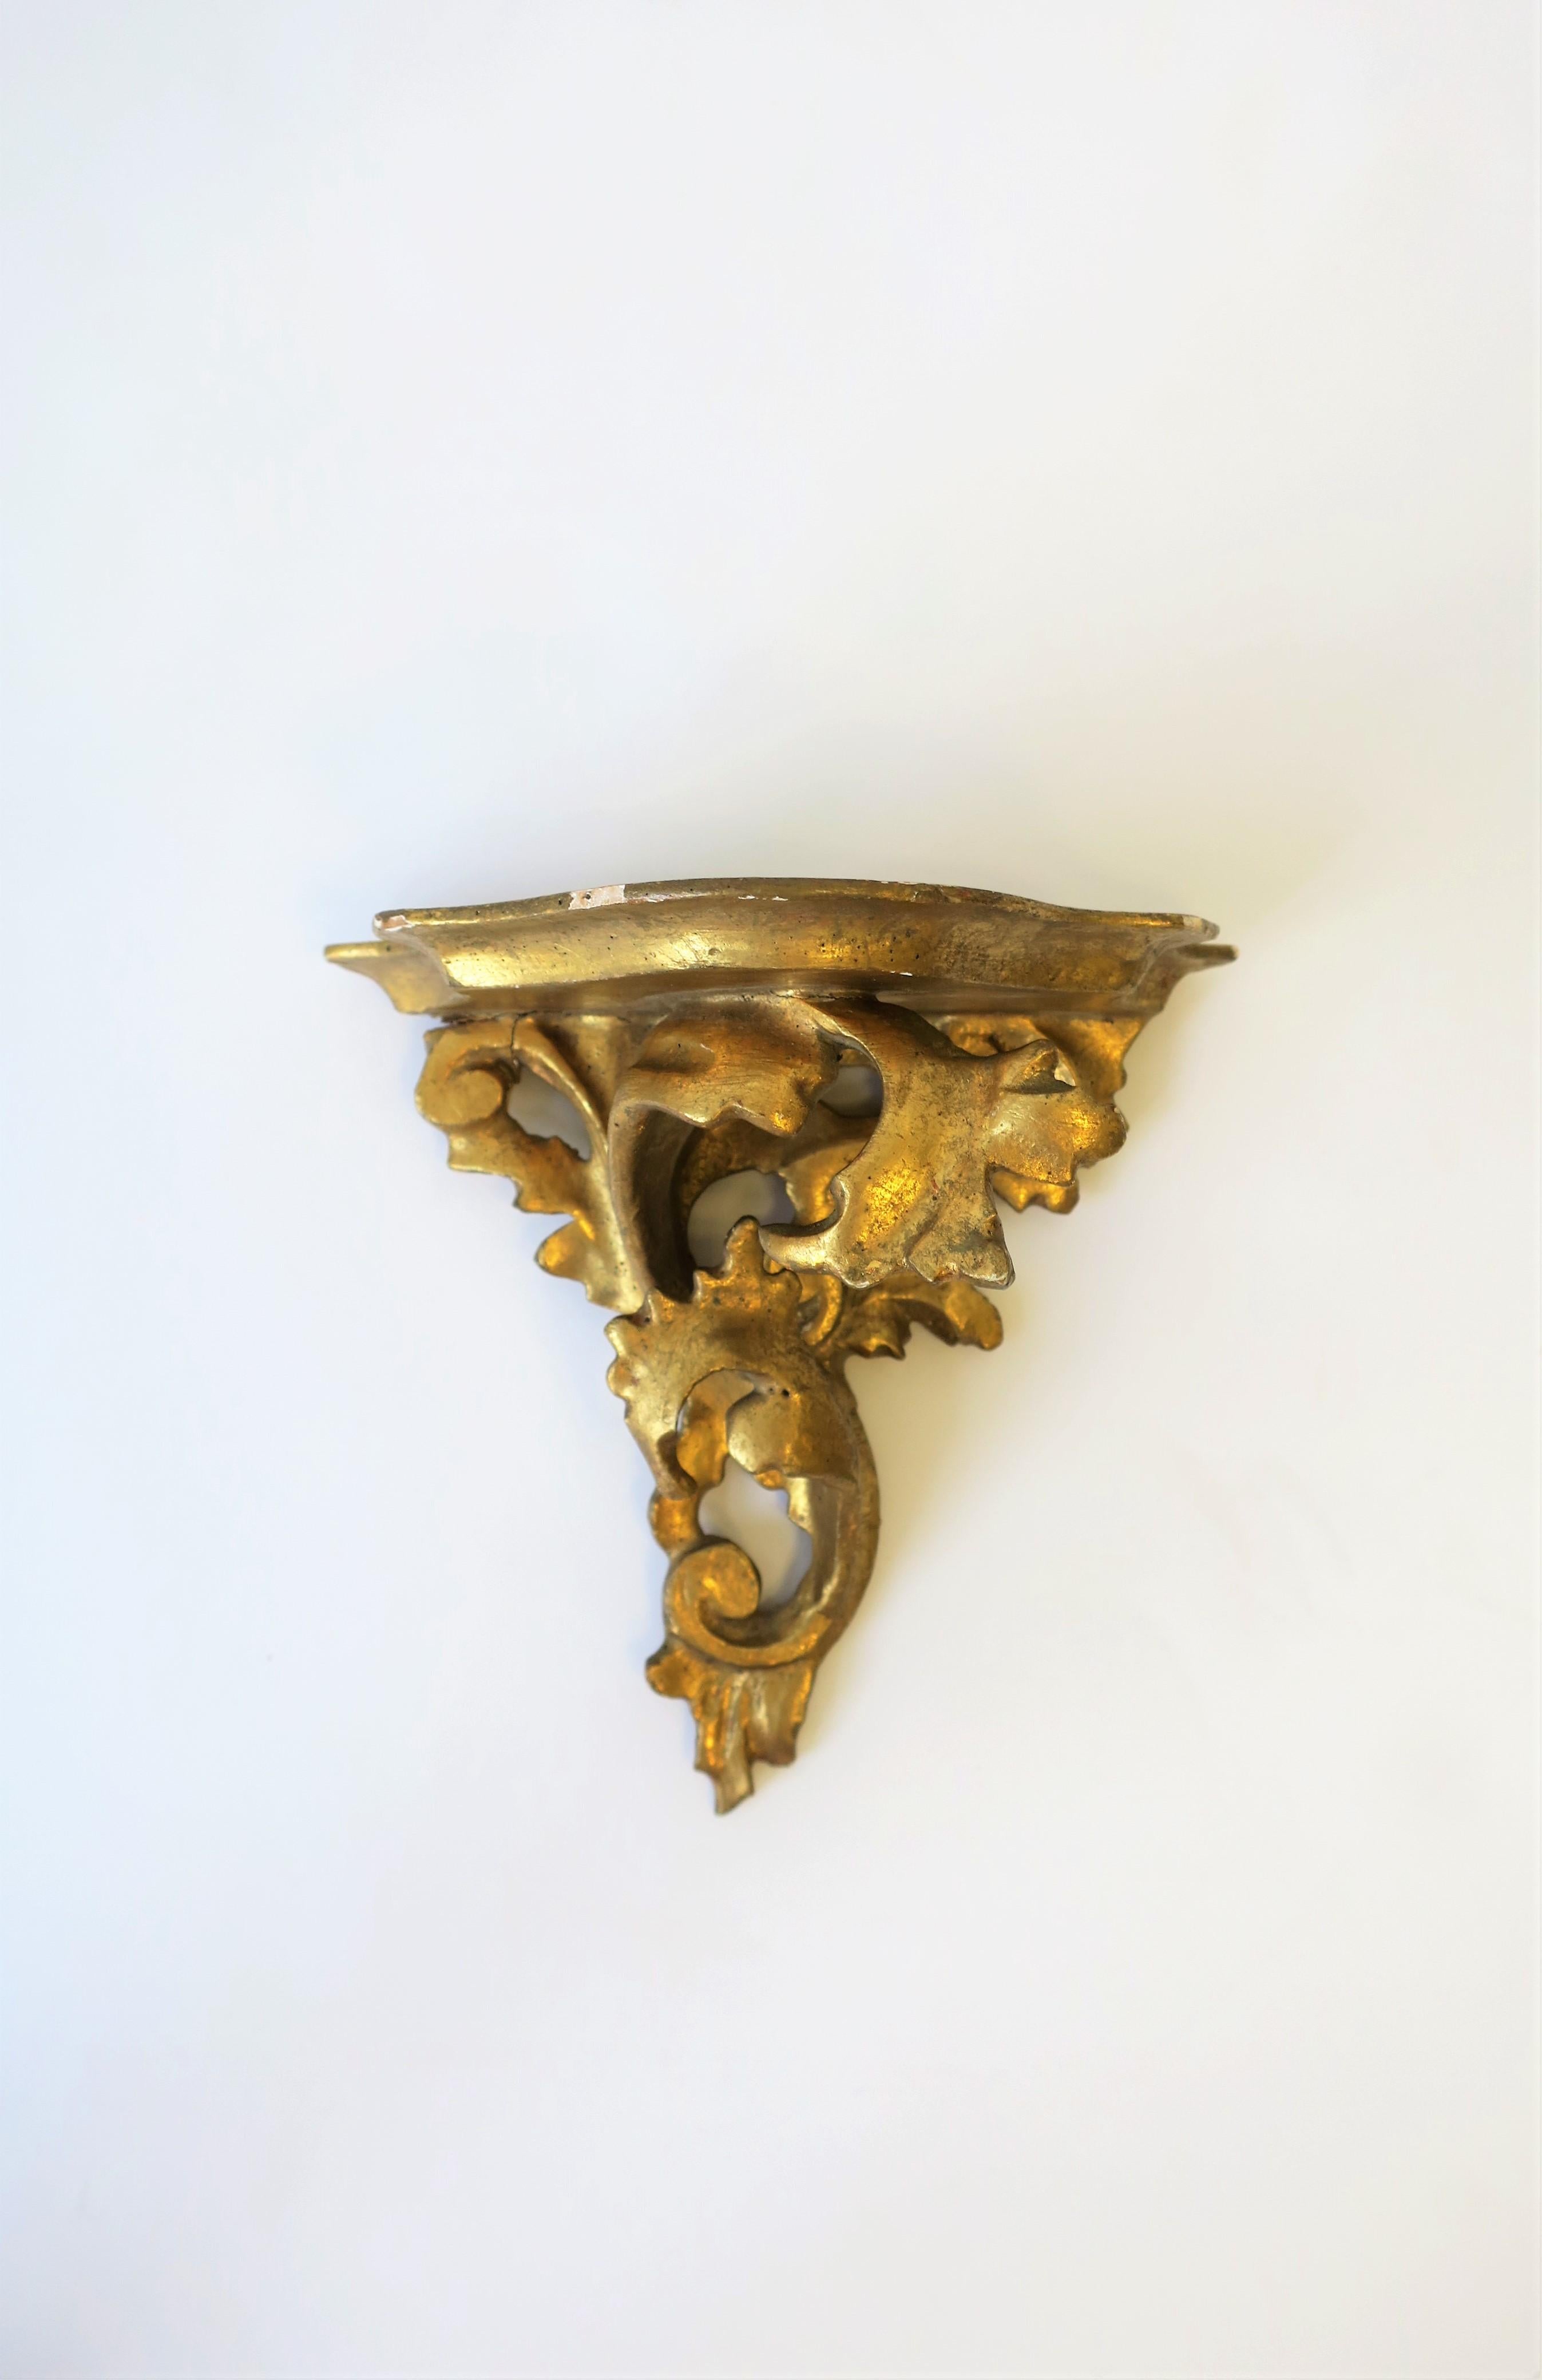 A beautiful, small, Italian gold gilt wall shelf bracket with acanthus leaf design, circa early 20th century, Italy. Piece is hand carved and finished with a heavy gold gilt over plaster and wood. Marked 'Made in Italy' on back as show in images #5